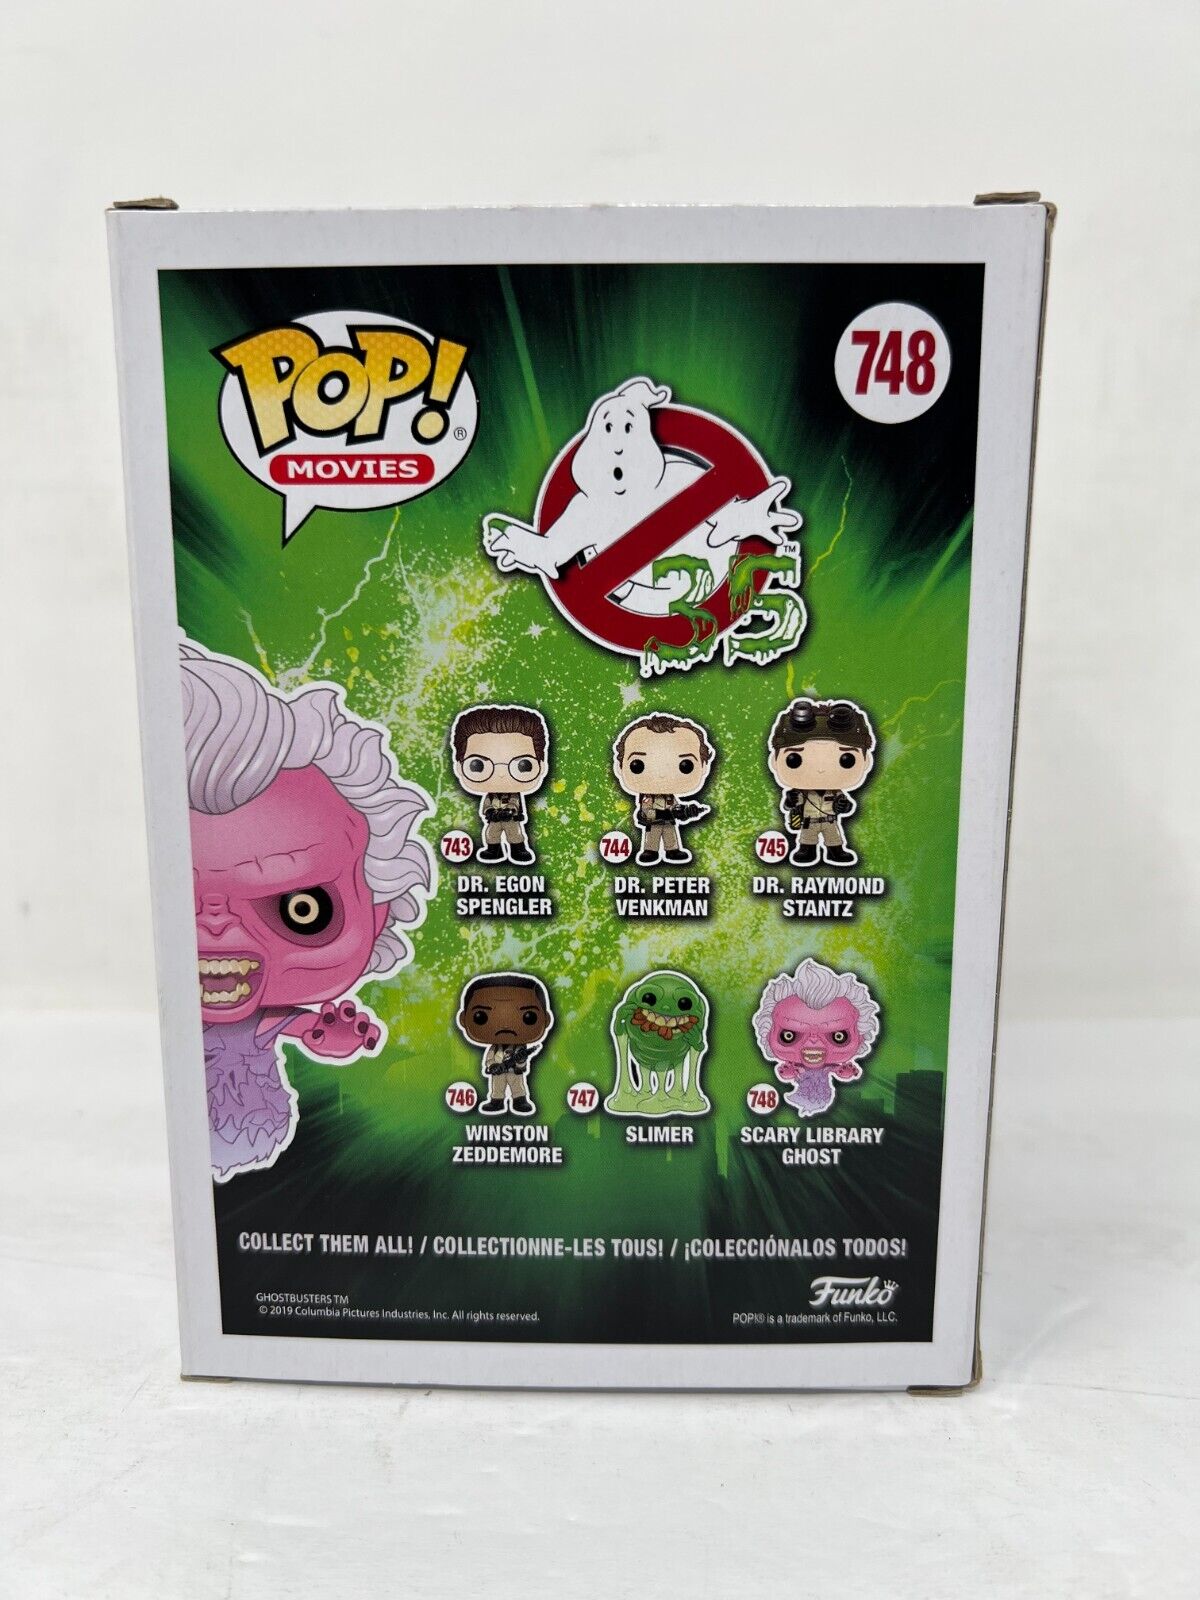 Funko Pop! Movies Ghostbusters #748 Scary Library Ghost Vinyl Figure Vaulted